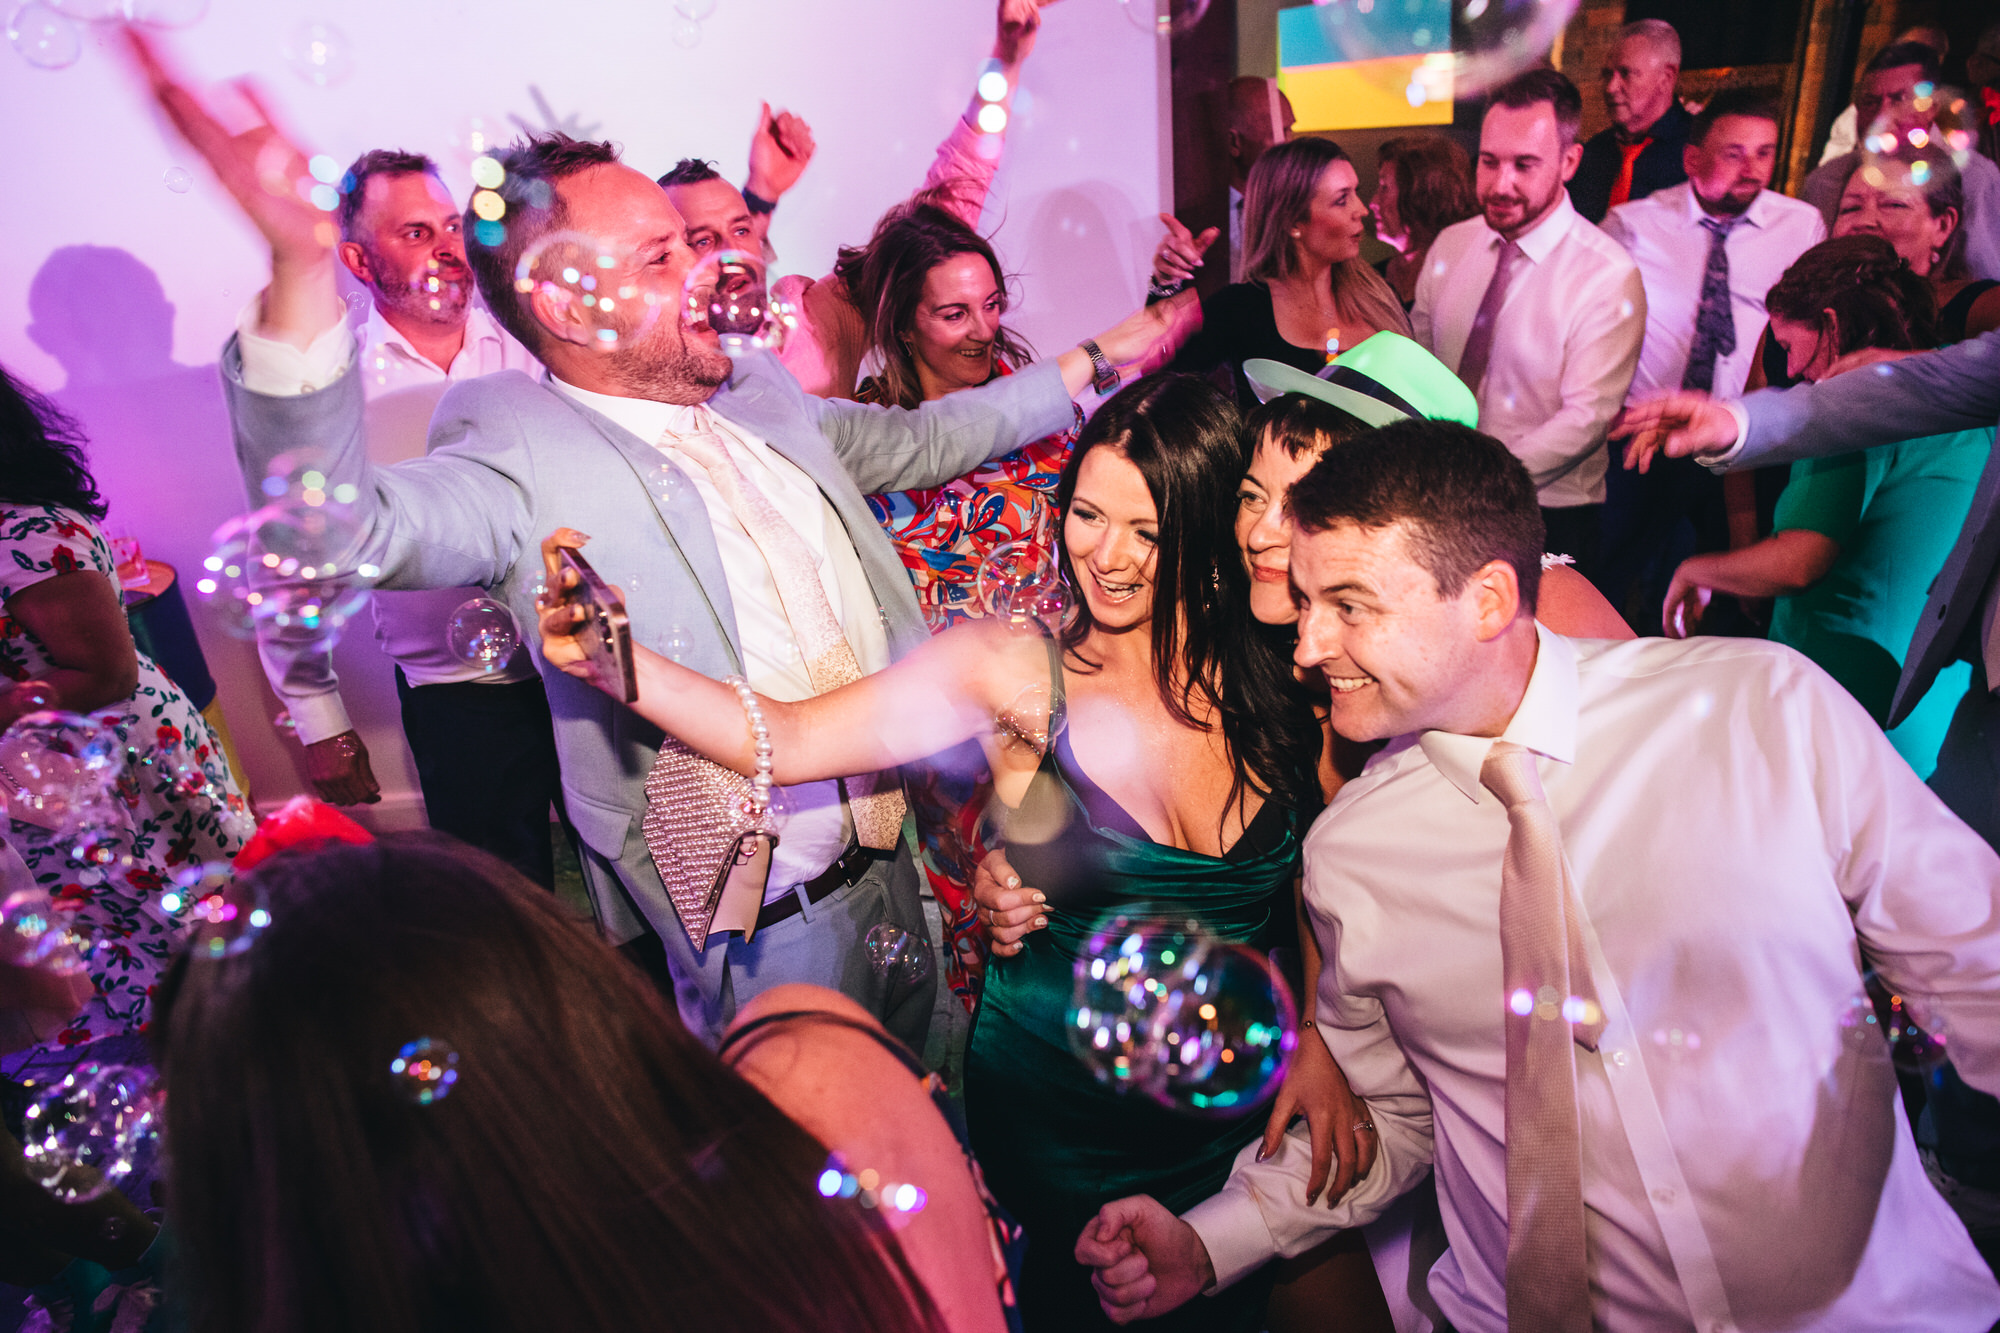 bride poses for selfie photo with guests, bubbles